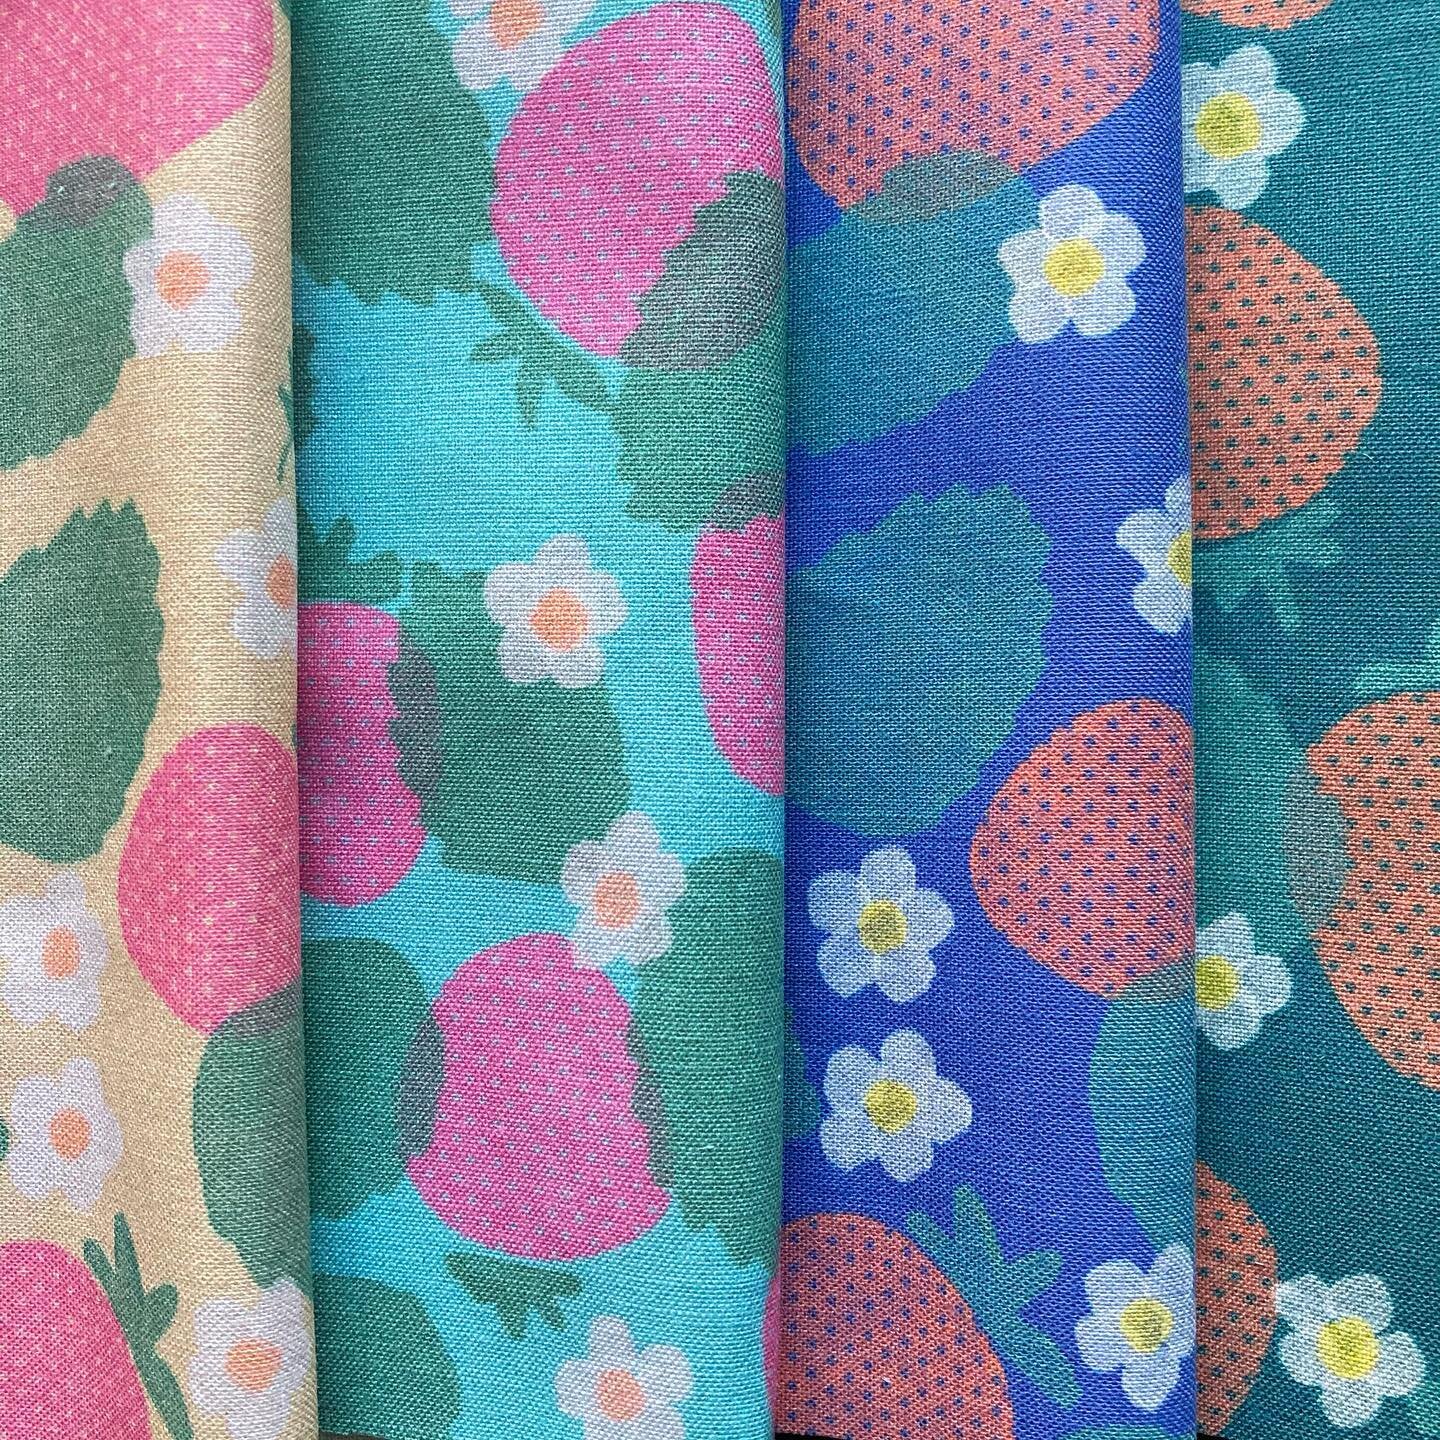 Fresh new berry prints in my shop on @spoonflower Check them out and stock up for your spring projects!